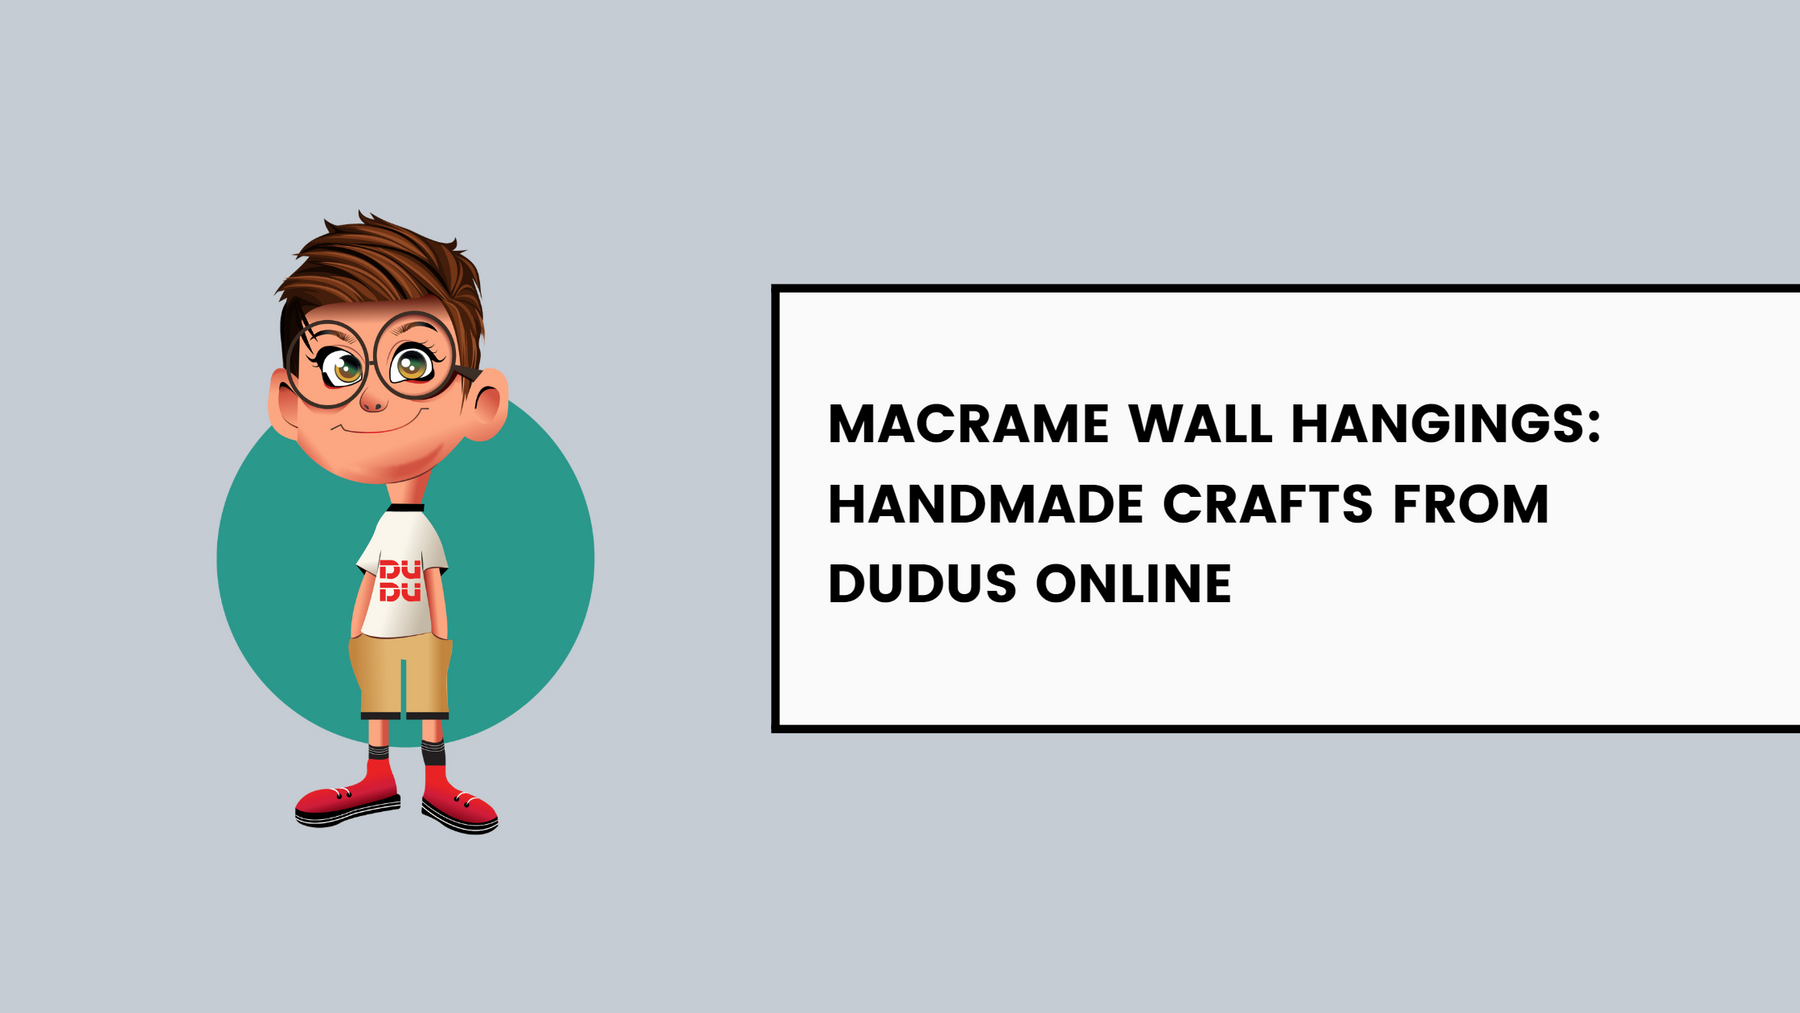 Macrame Wall Hangings: Handmade Crafts From Dudus Online